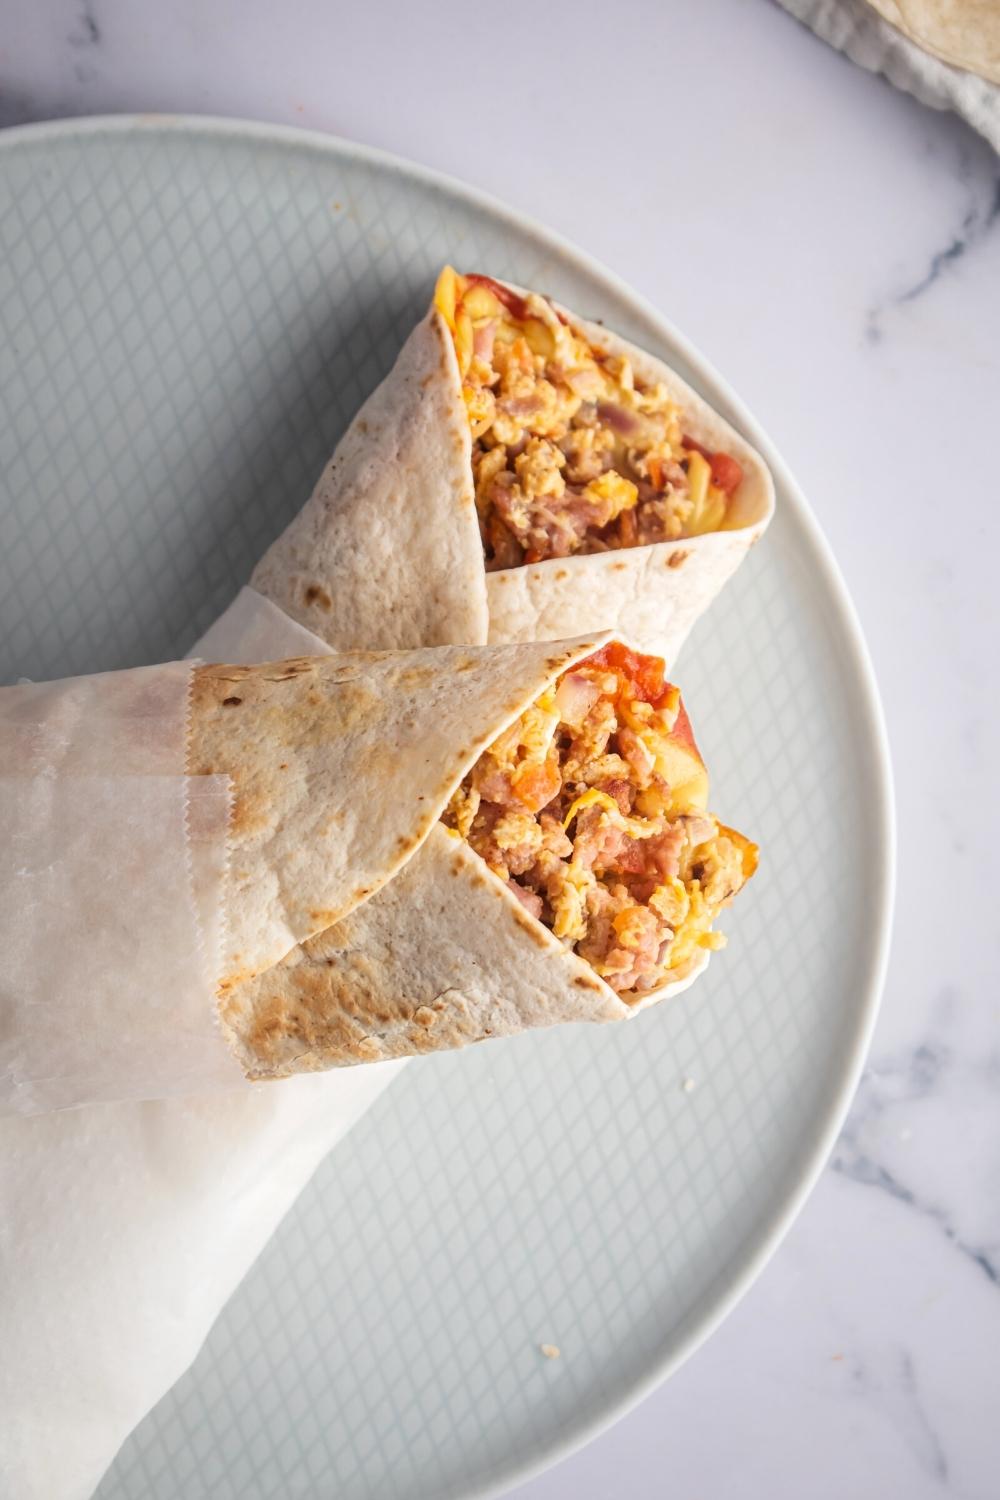 Half of a breakfast burrito wraps in parchment paper on top of another one of the breakfast burritos on part of a plate.